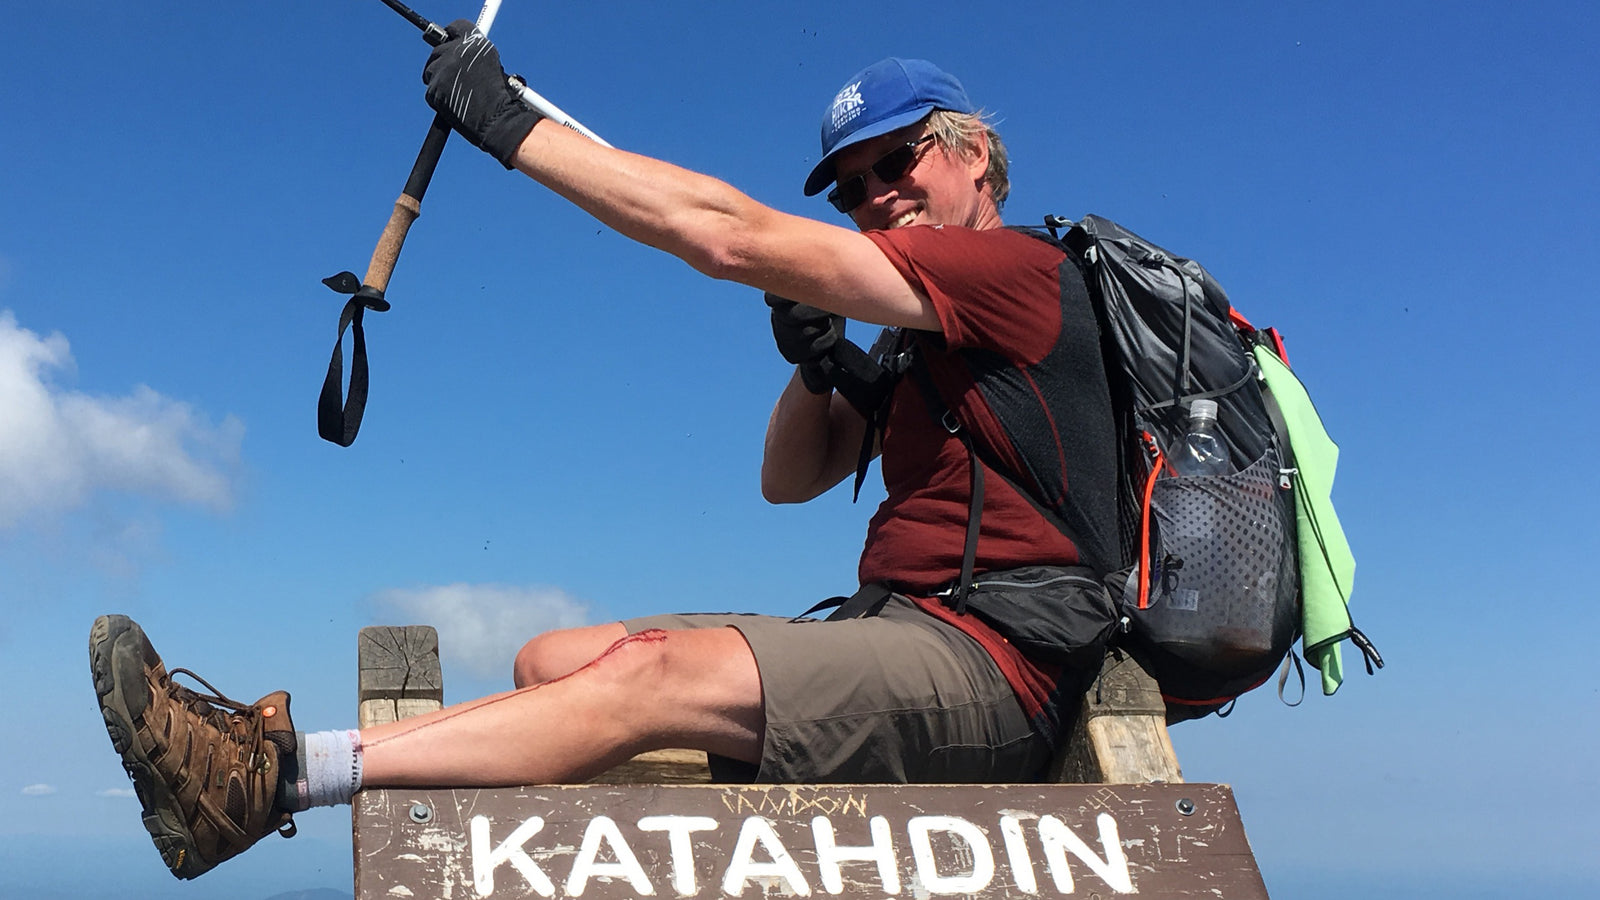 Adrian sitting on top of the Katahdin sign, smiling, with a bloody knee, holding trekking poles